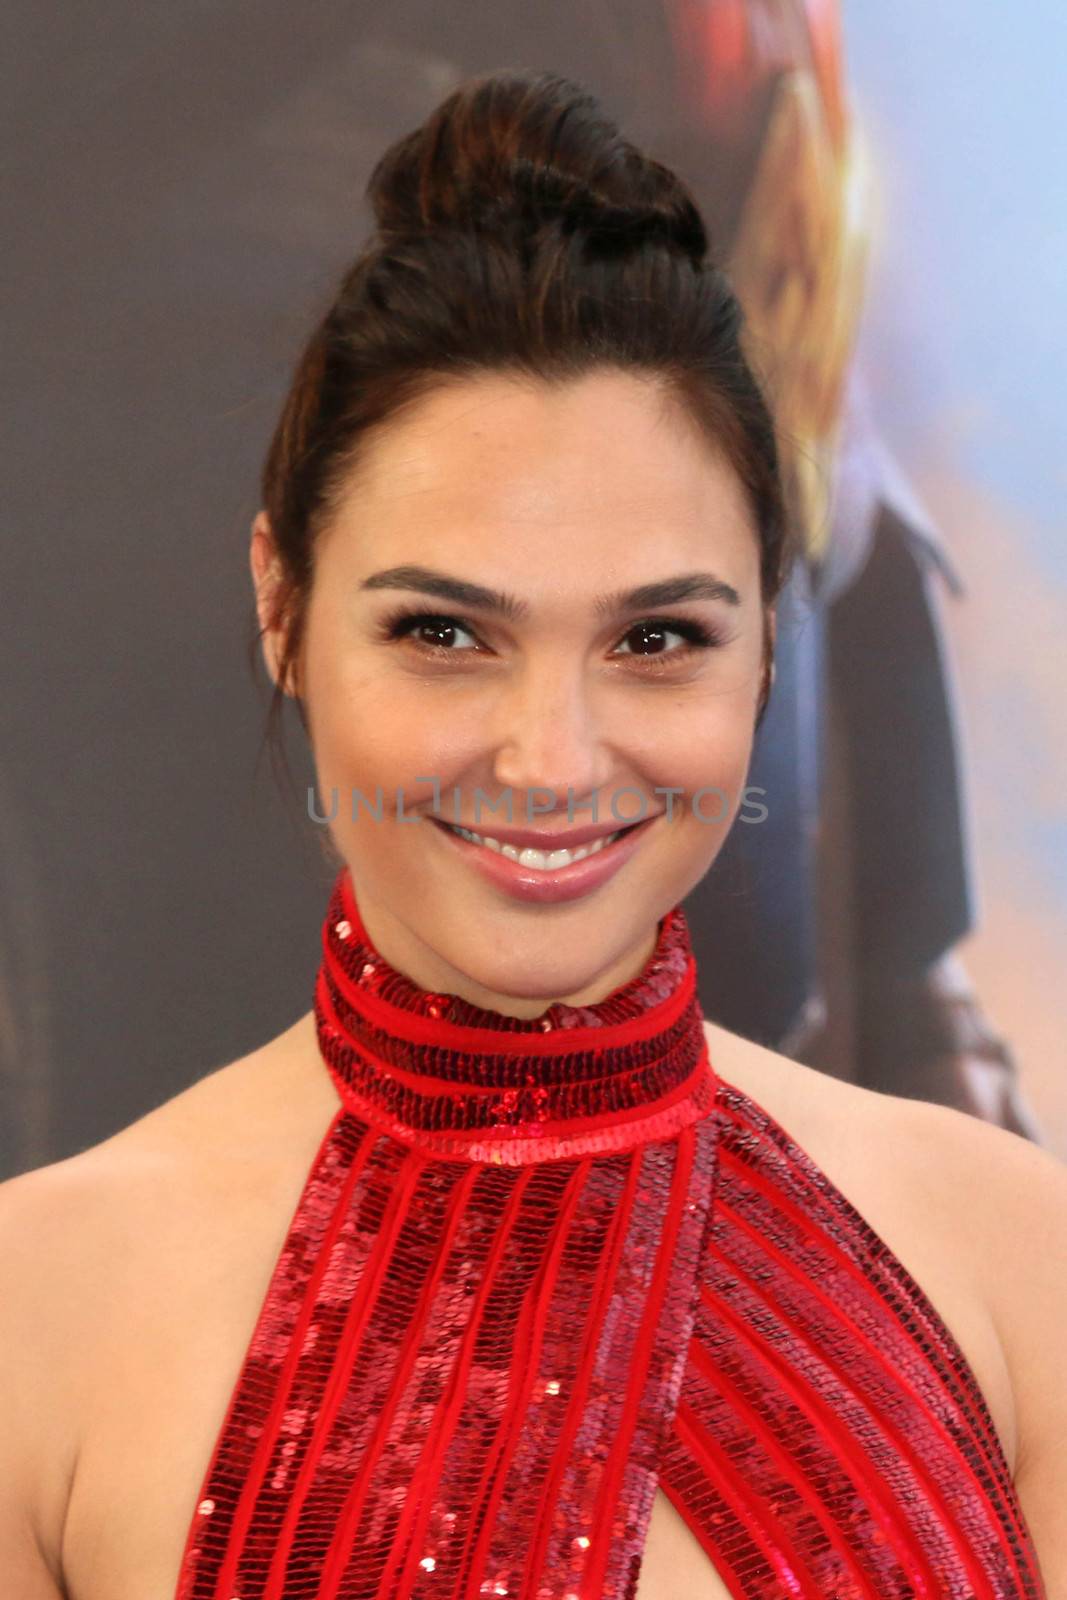 Gal Gadot
at the "Wonder Woman" Premiere, Pantages, Hollywood, CA 05-25-17/ImageCollect by ImageCollect